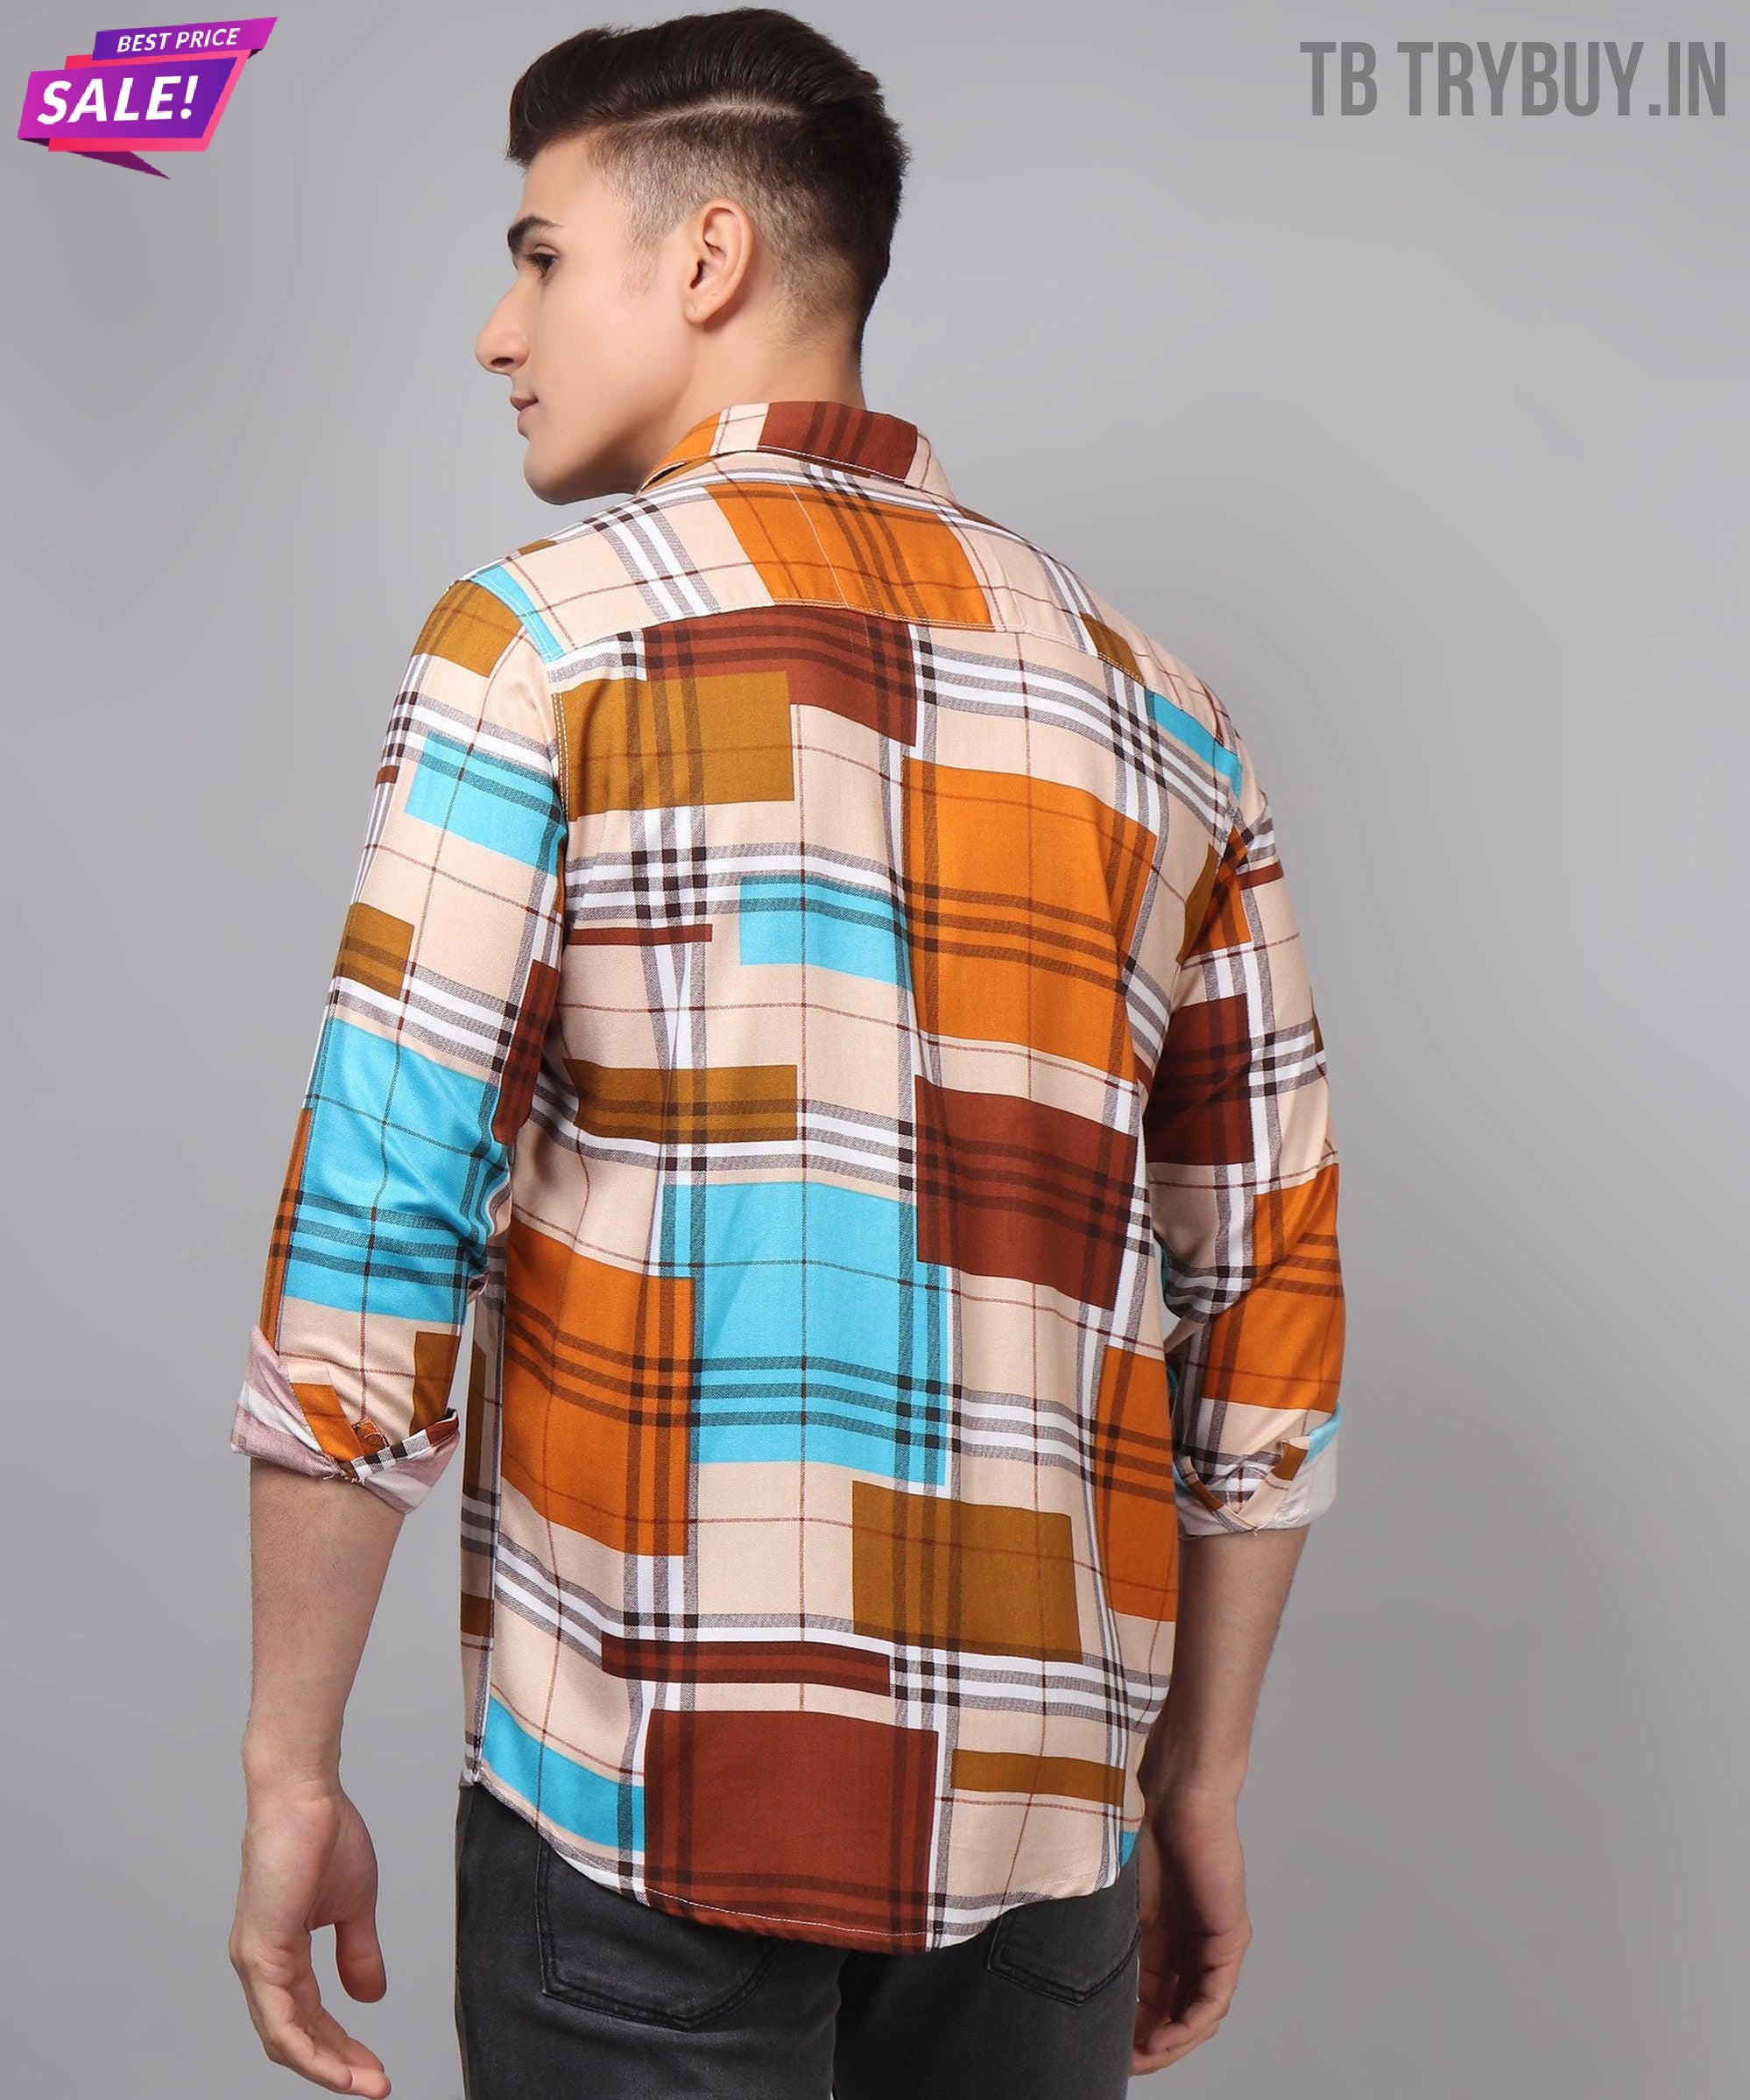 Trybuy Premium Printed Multi Colored Cotton Casual Shirt for Men